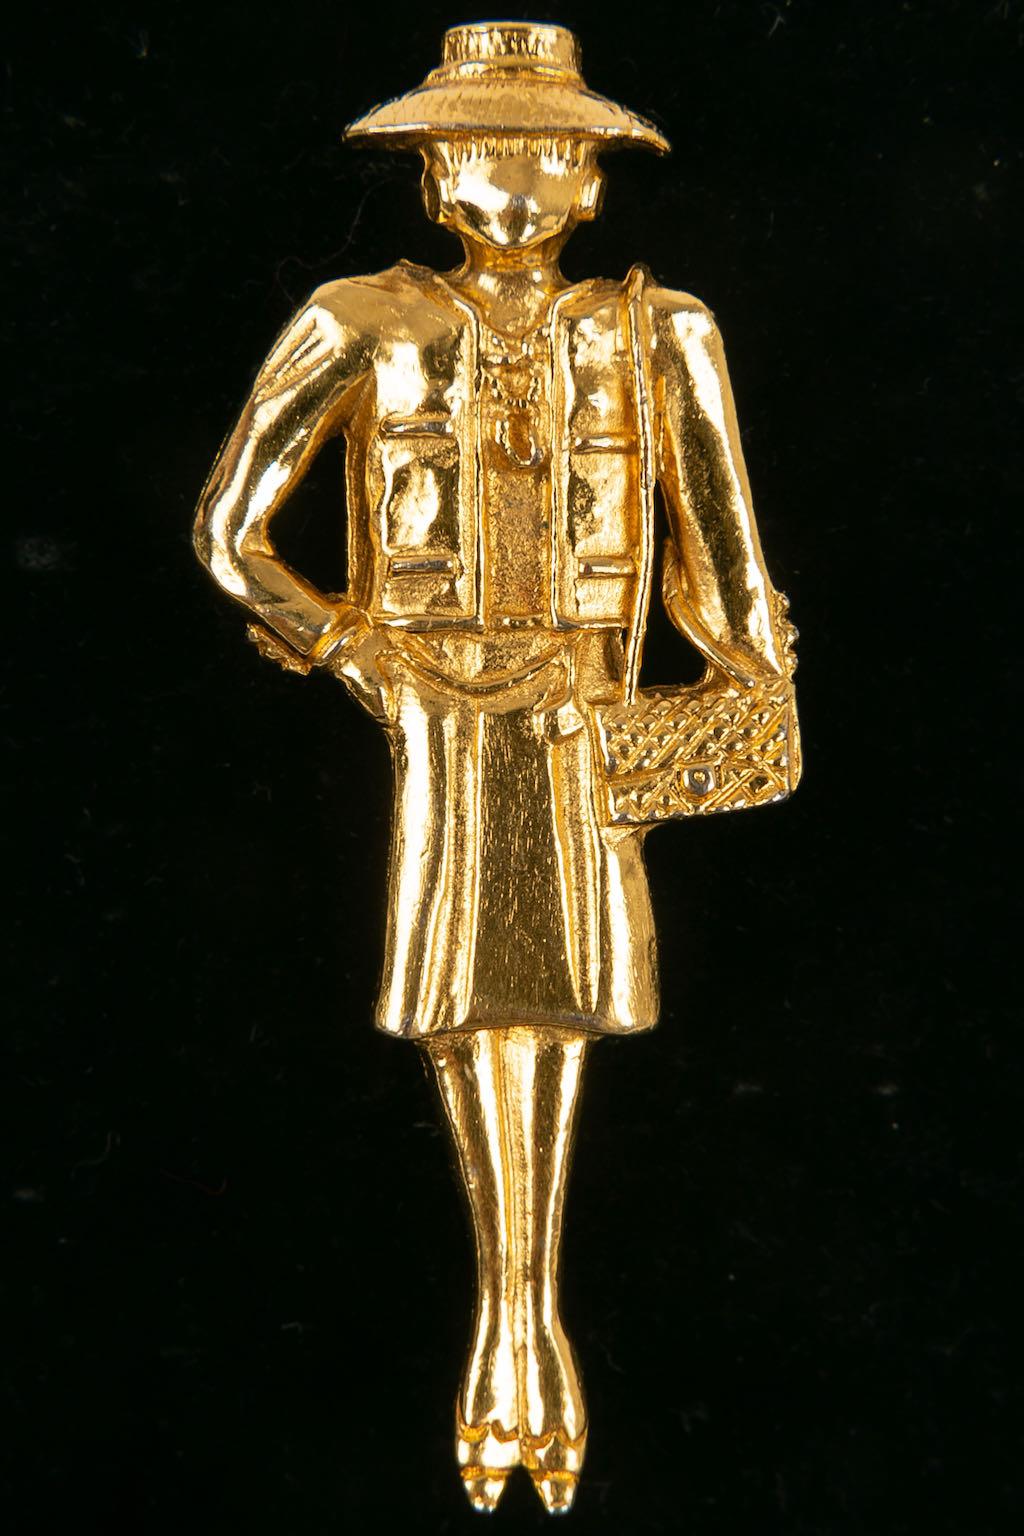 Chanel -(Made in France) Brooch featuring the silhouette of coco in gold metal.
Brooch designed by Karl Largerfeld for Chanel. Work by the Woloch workshop. 

Additional information:

Dimensions:
Height: 6 cm

Condition: 
Very good condition

Seller